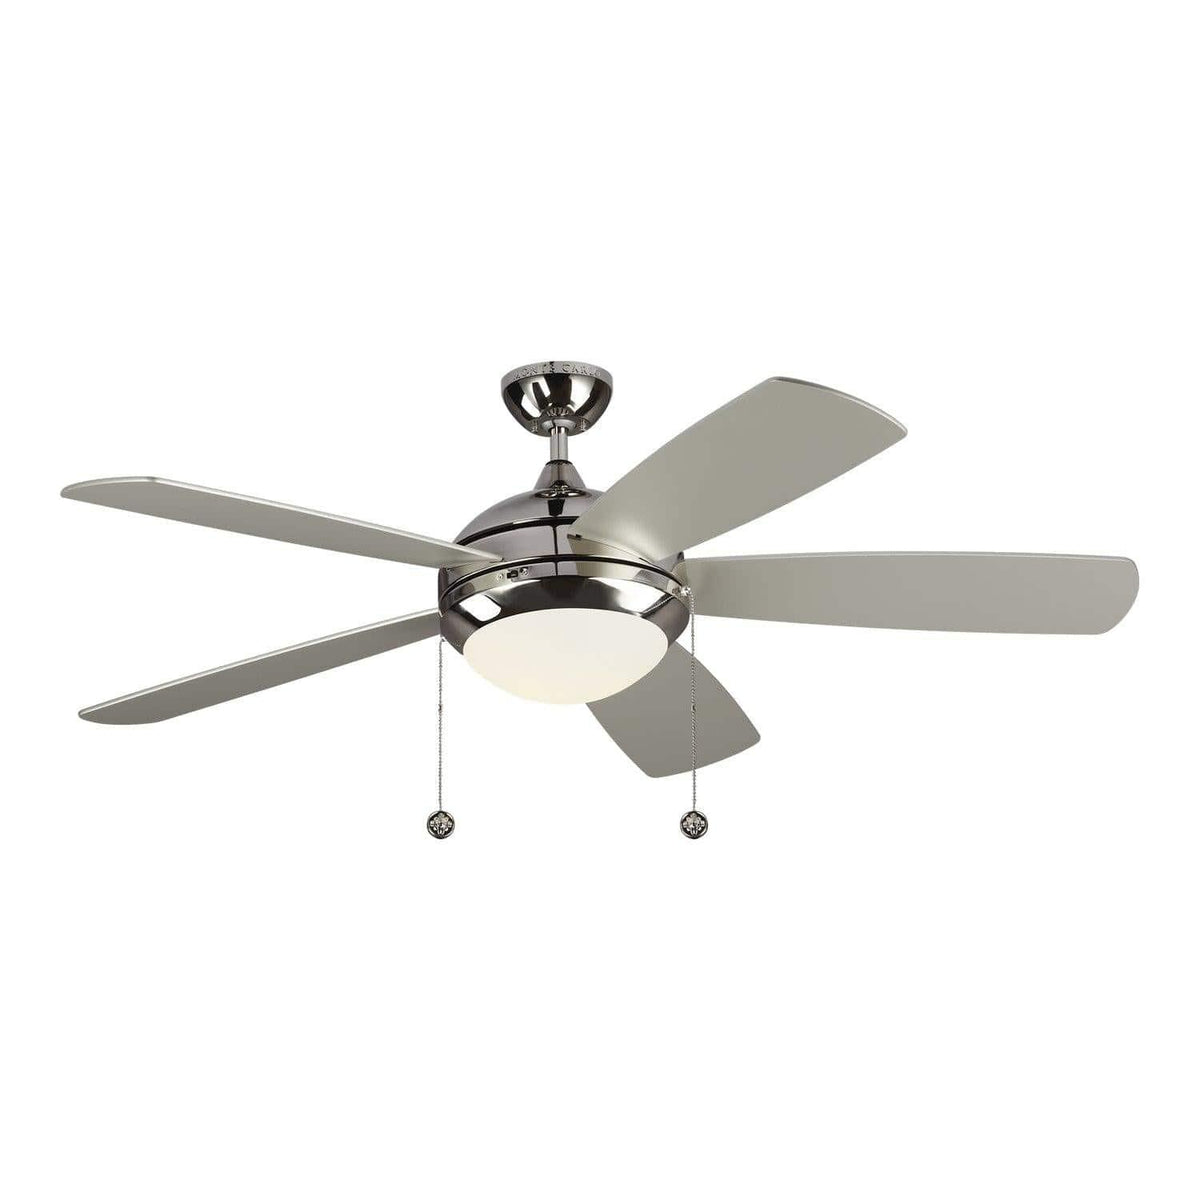 Visual Comfort Fan Collection - Discus Classic 52" Ceiling Fan - 5DIC52PND-V1 | Montreal Lighting & Hardware